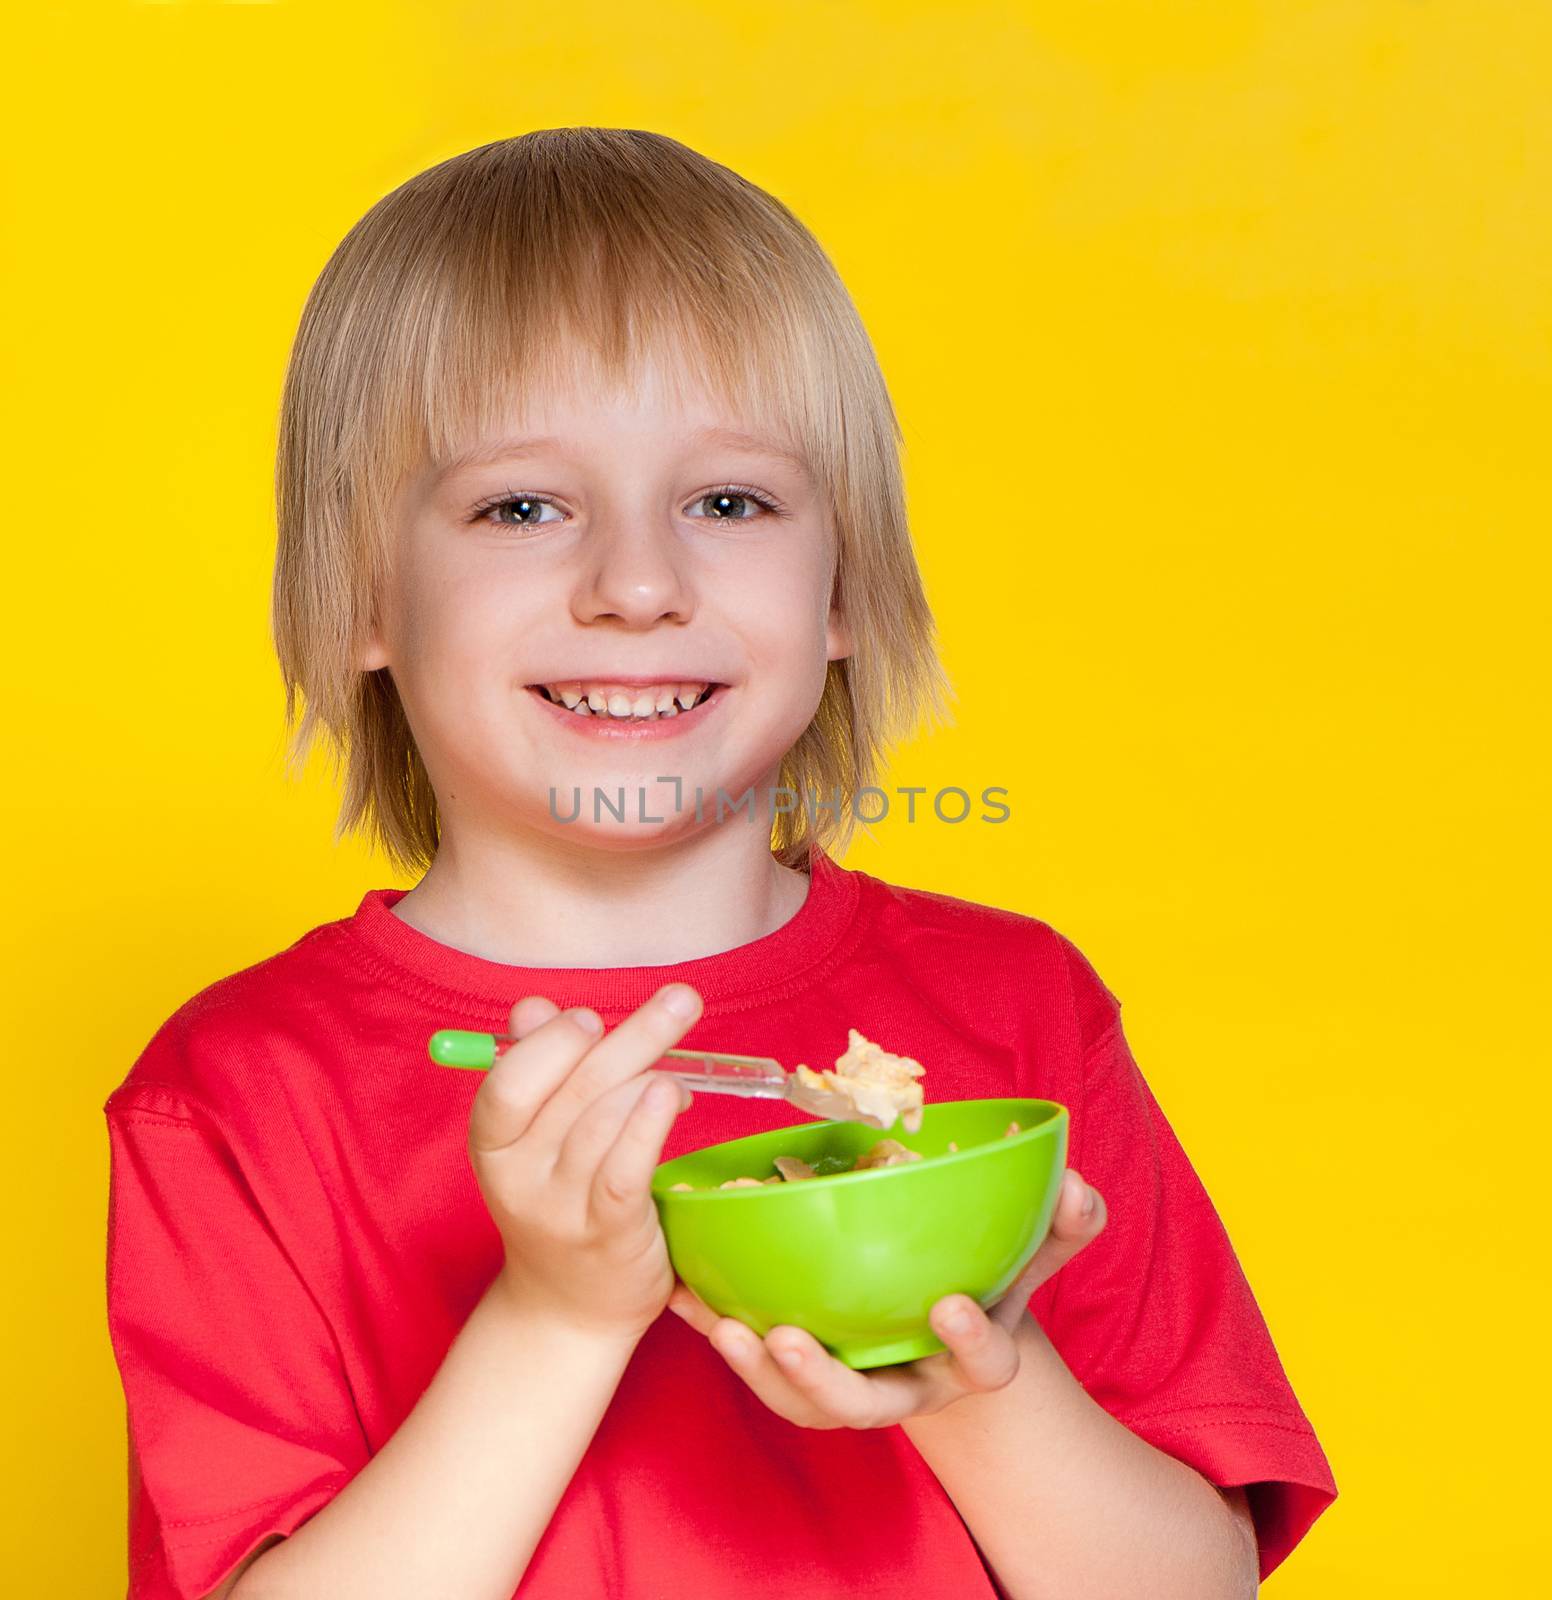 Blond boy kid child eating corn flakes cereal by Anpet2000